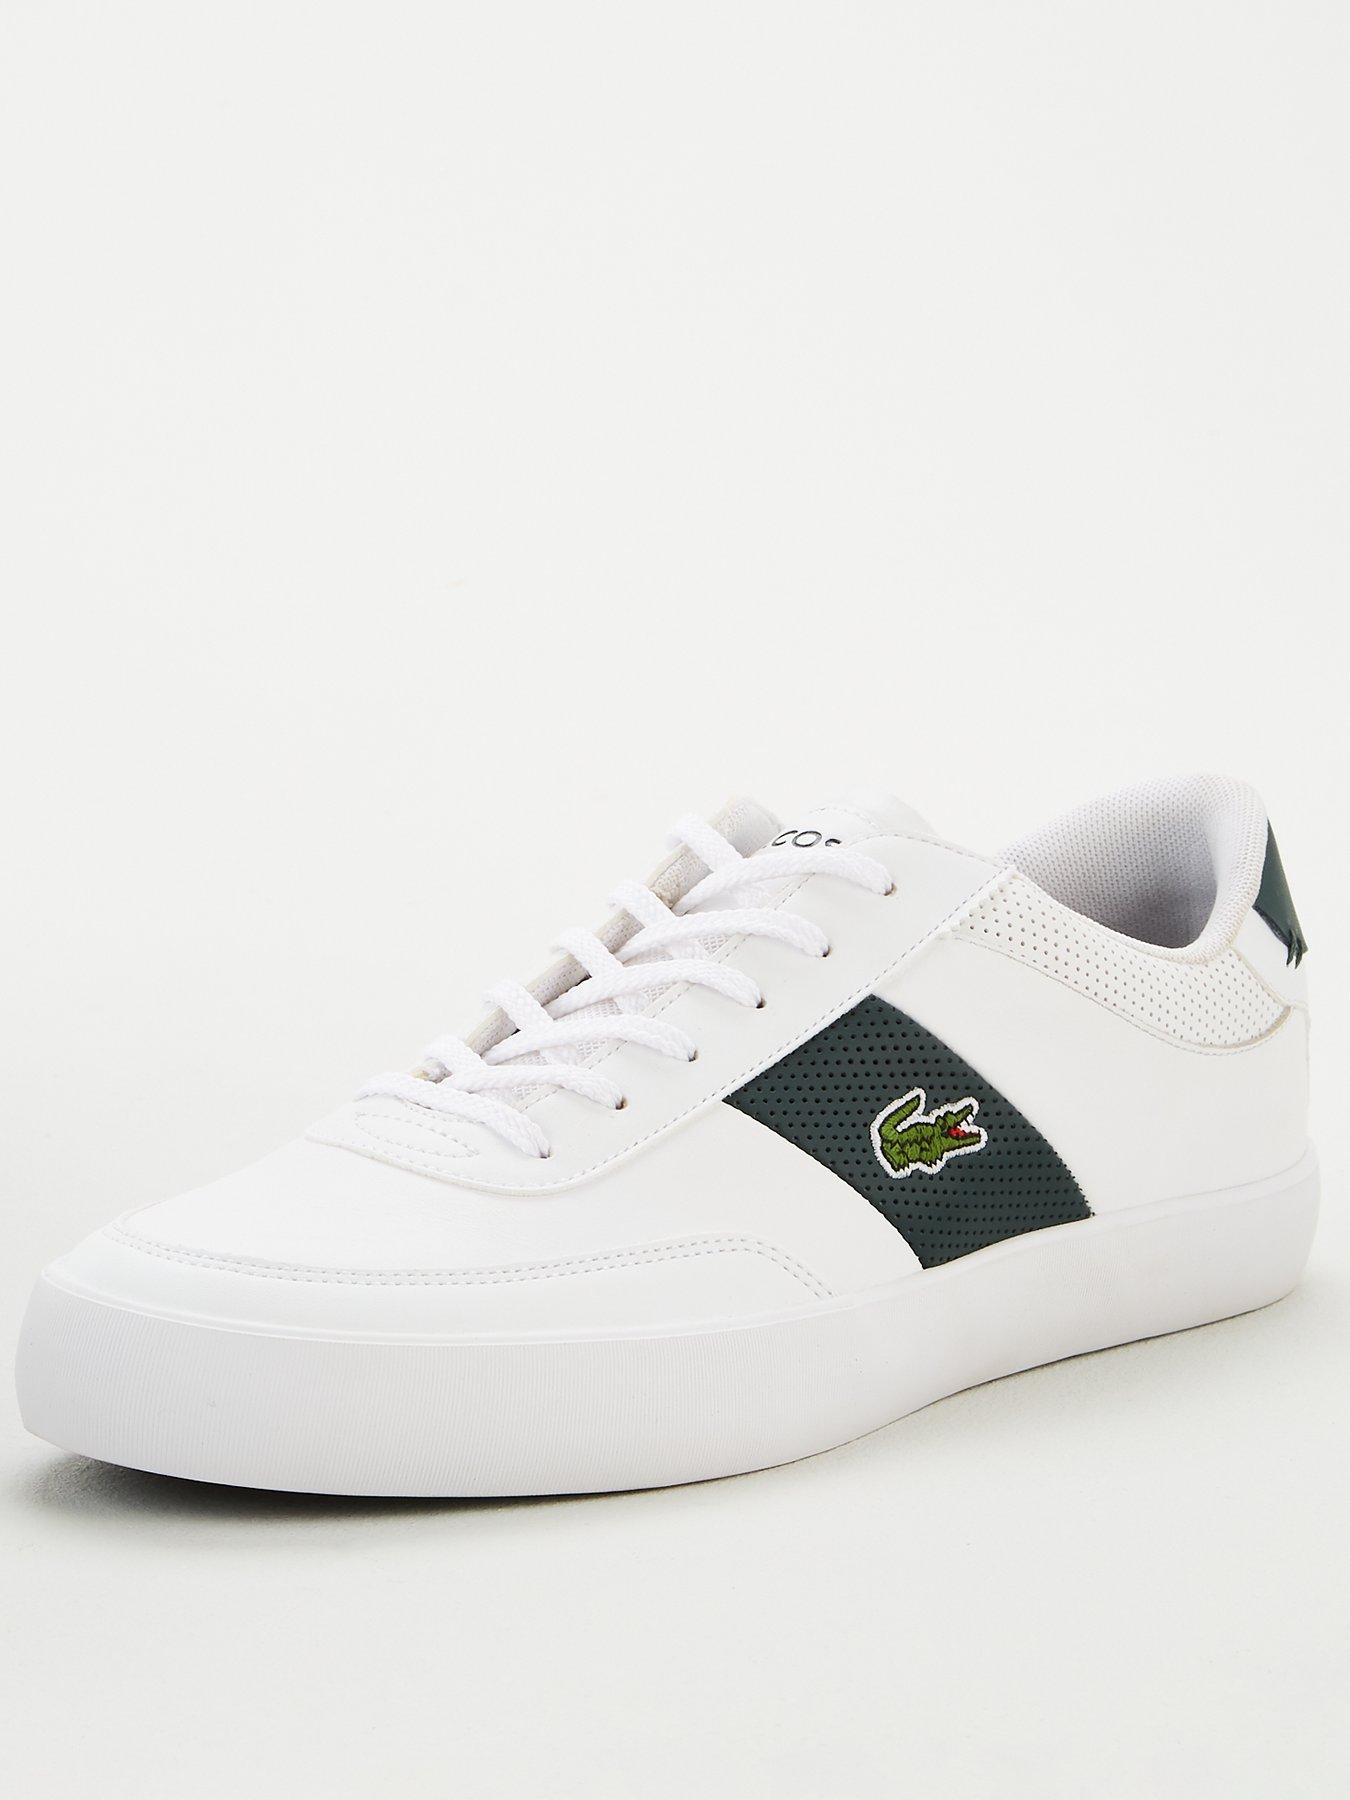 leather mens lacoste trainers